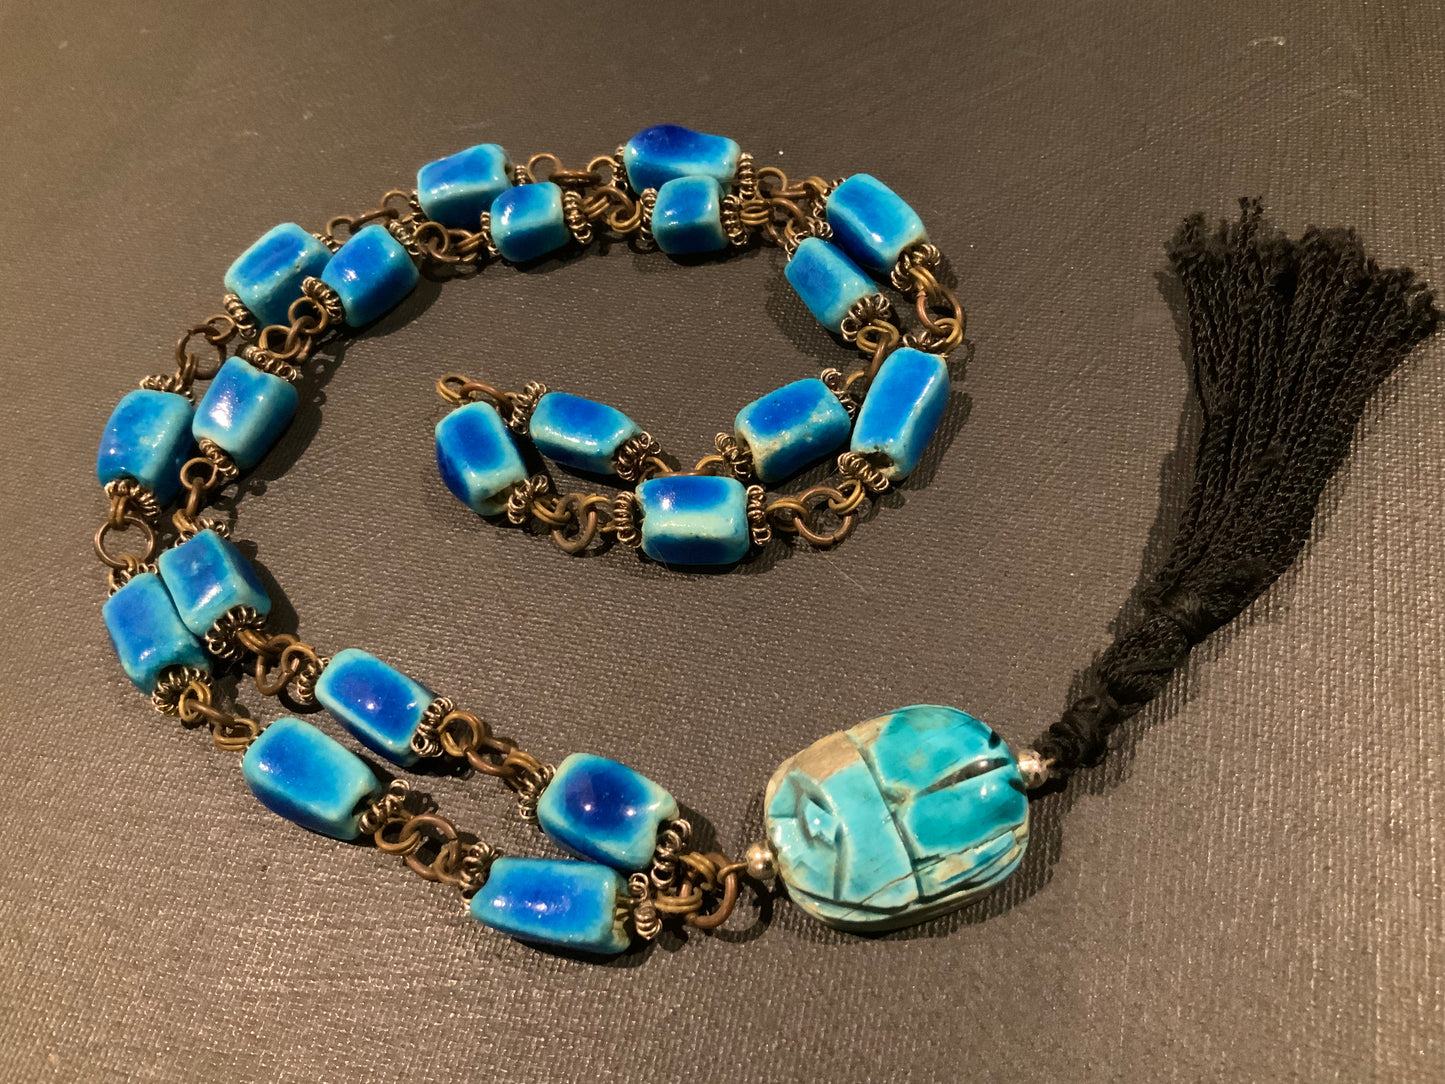 Antique Egyptian Blue Faïence Scarab Beetle Mixed Metal Bead Necklace